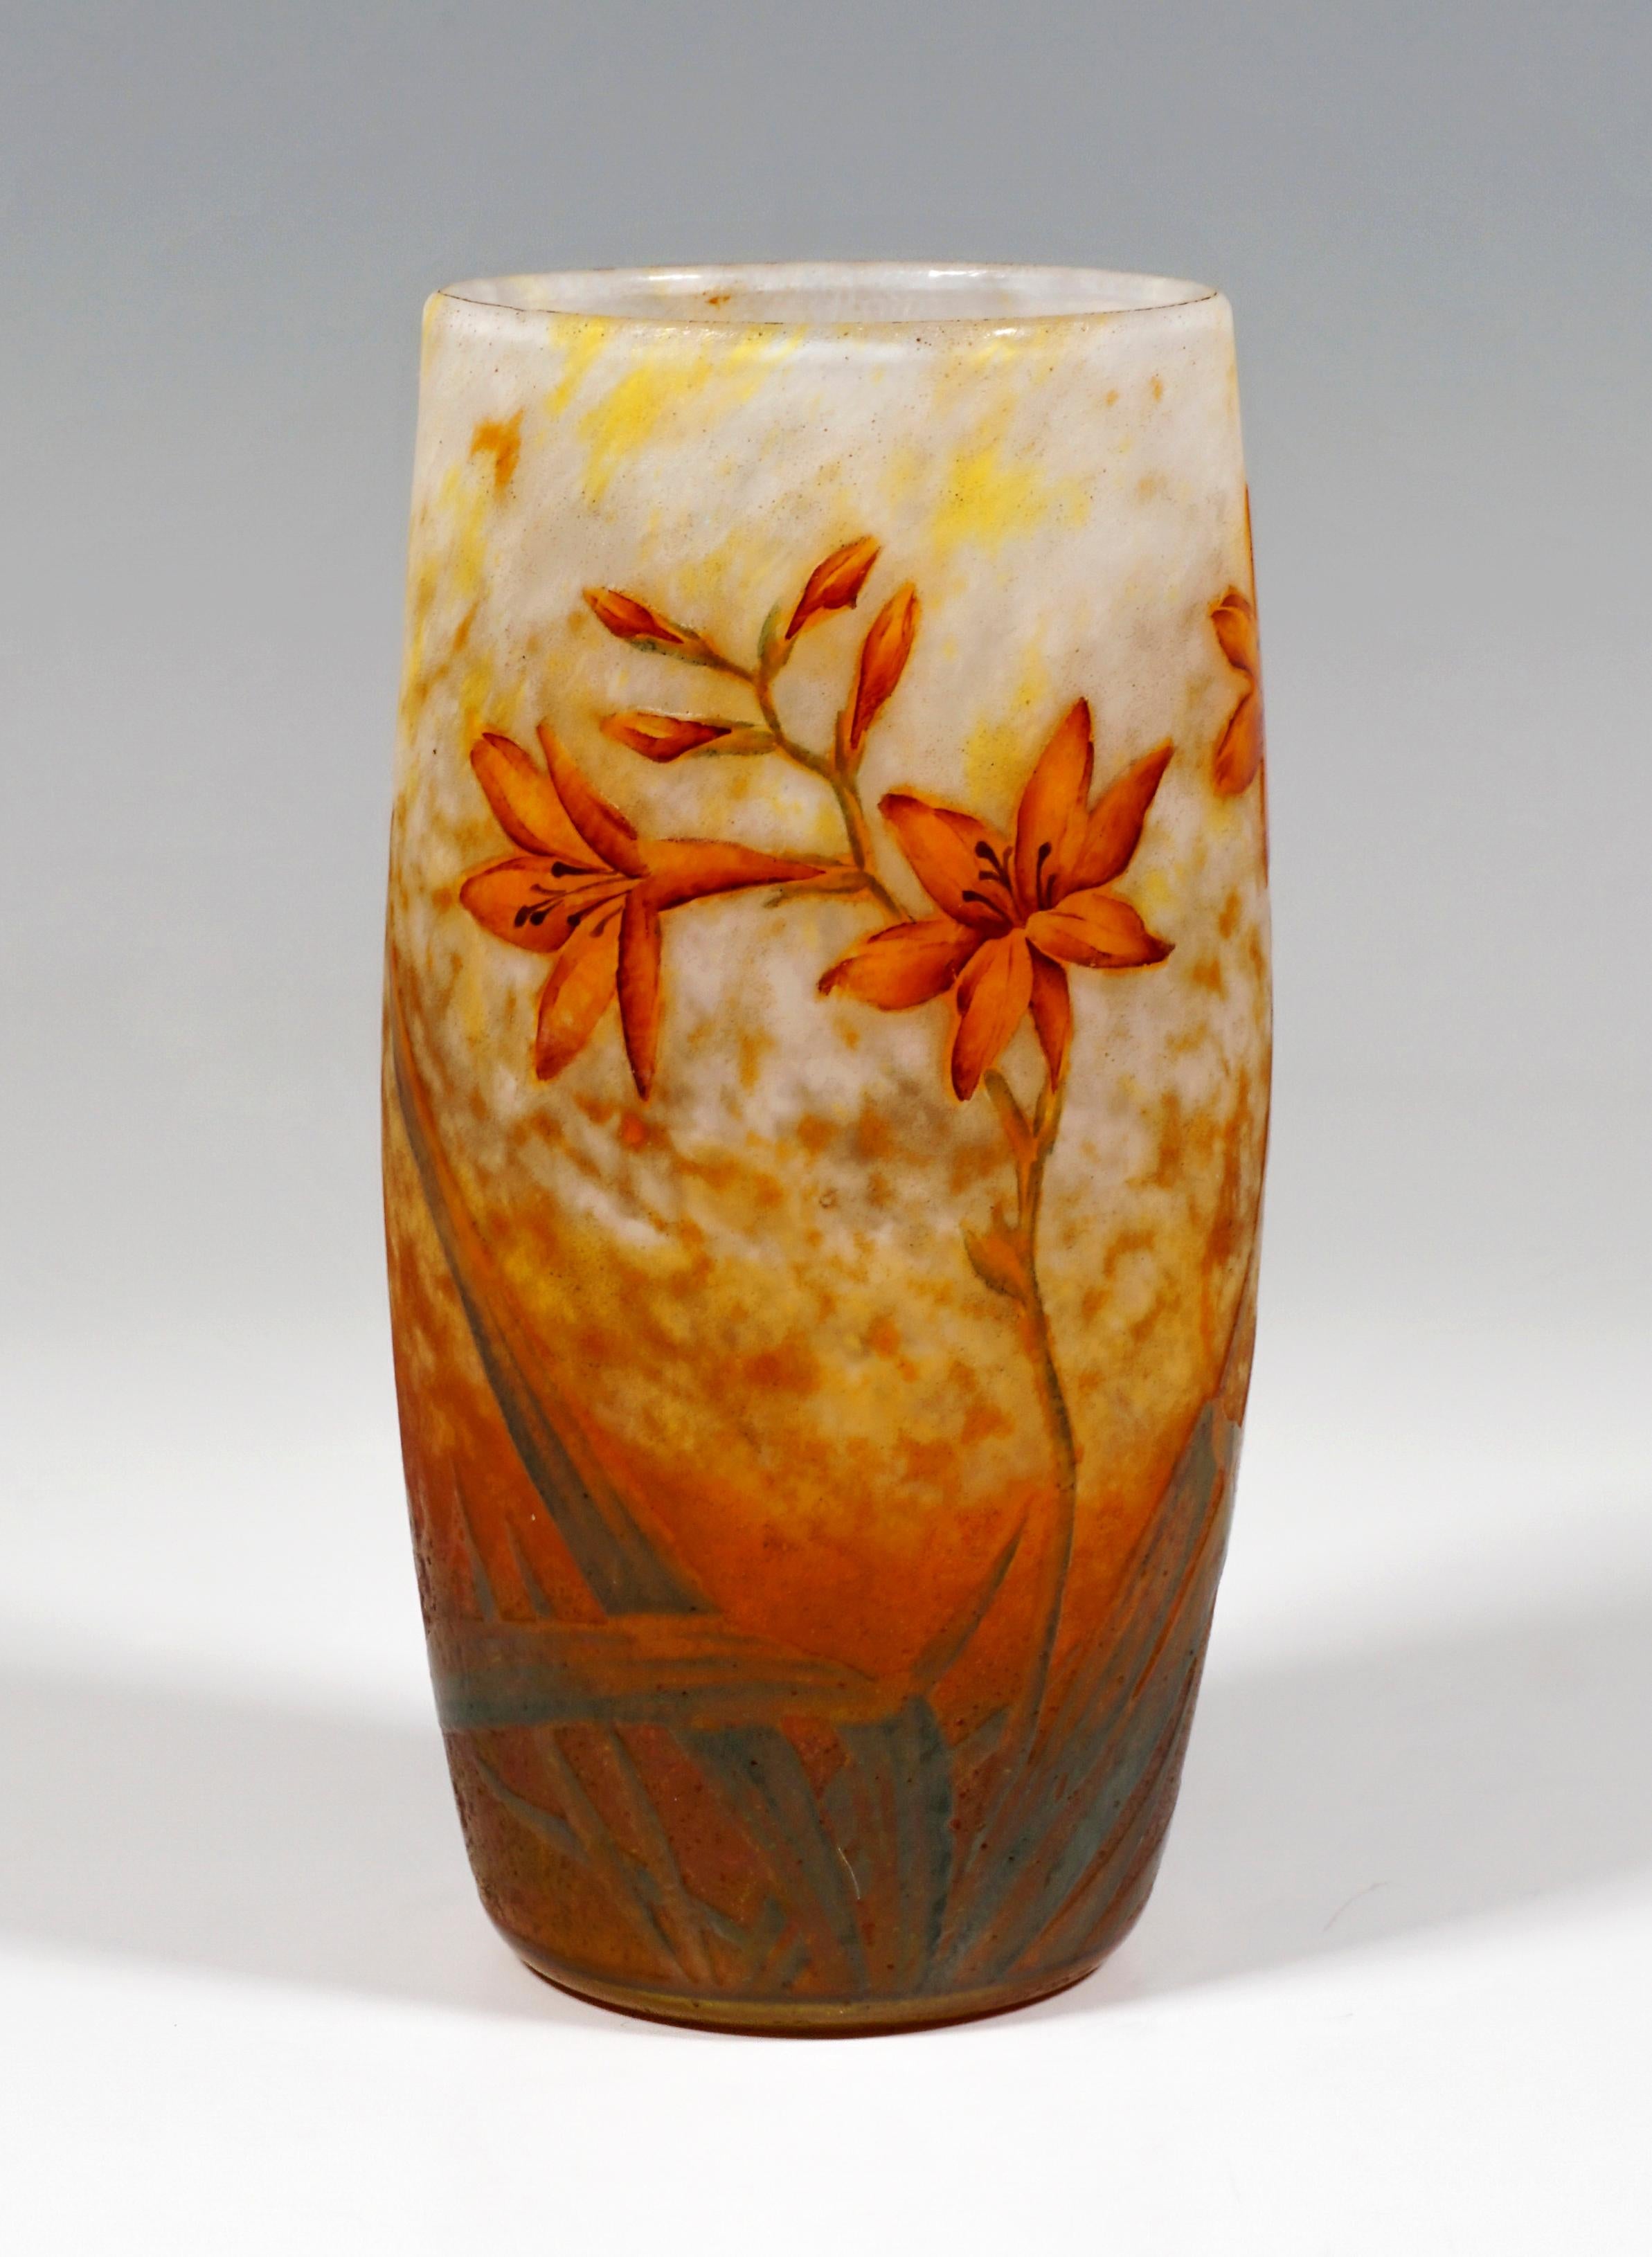 Cylindrical vase, colorless glass with flaky white and yellow, in the stand area with rust-brown and green powder melts, with etched daylily decoration painted in colored enamel, satined, structured surface in the background, relief signature 'DAUM